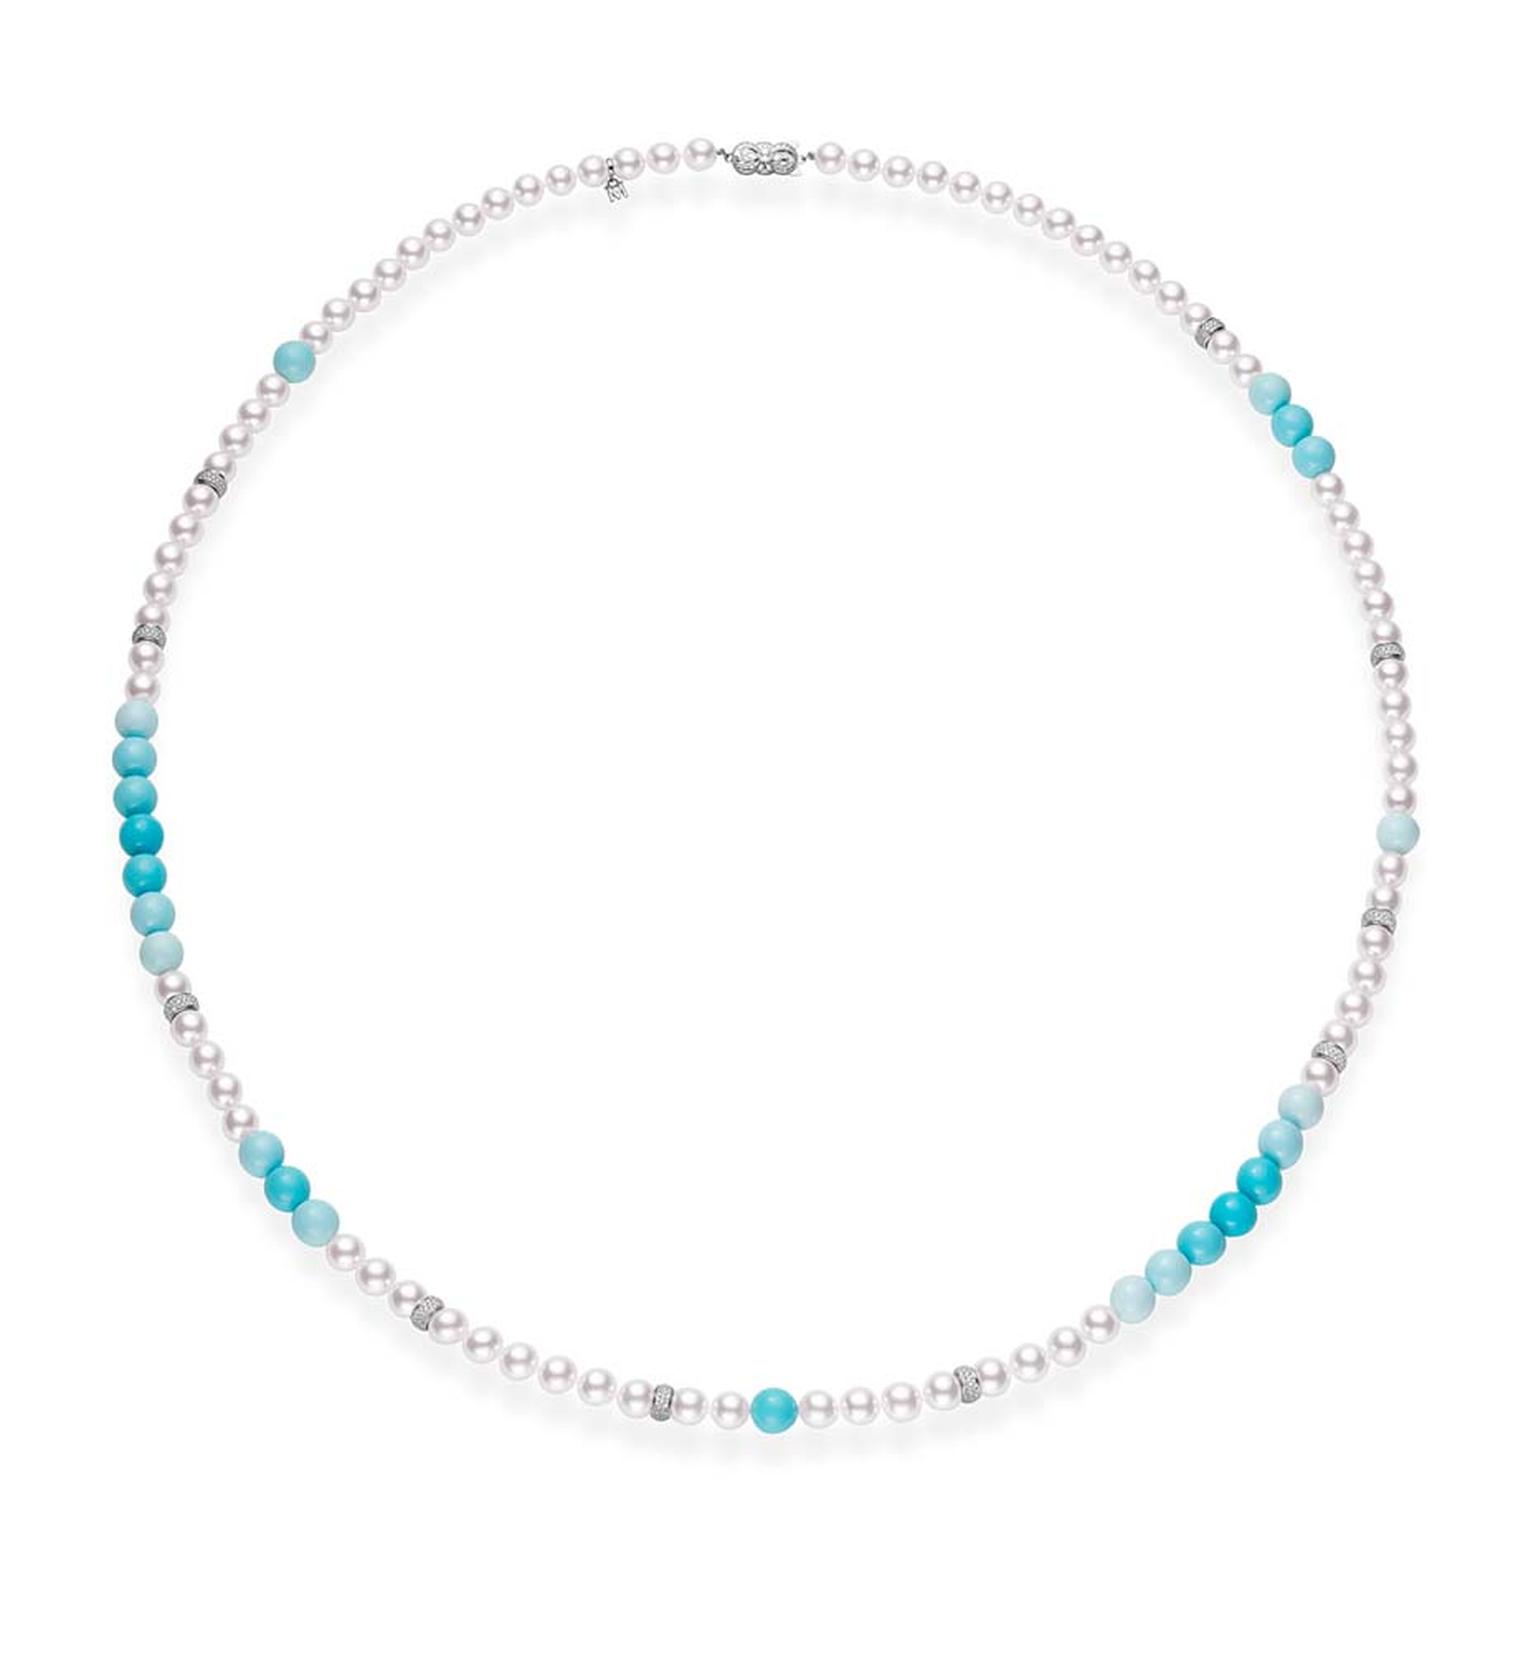 Mikimoto pearl necklace, interspersed with graduated turquoise.